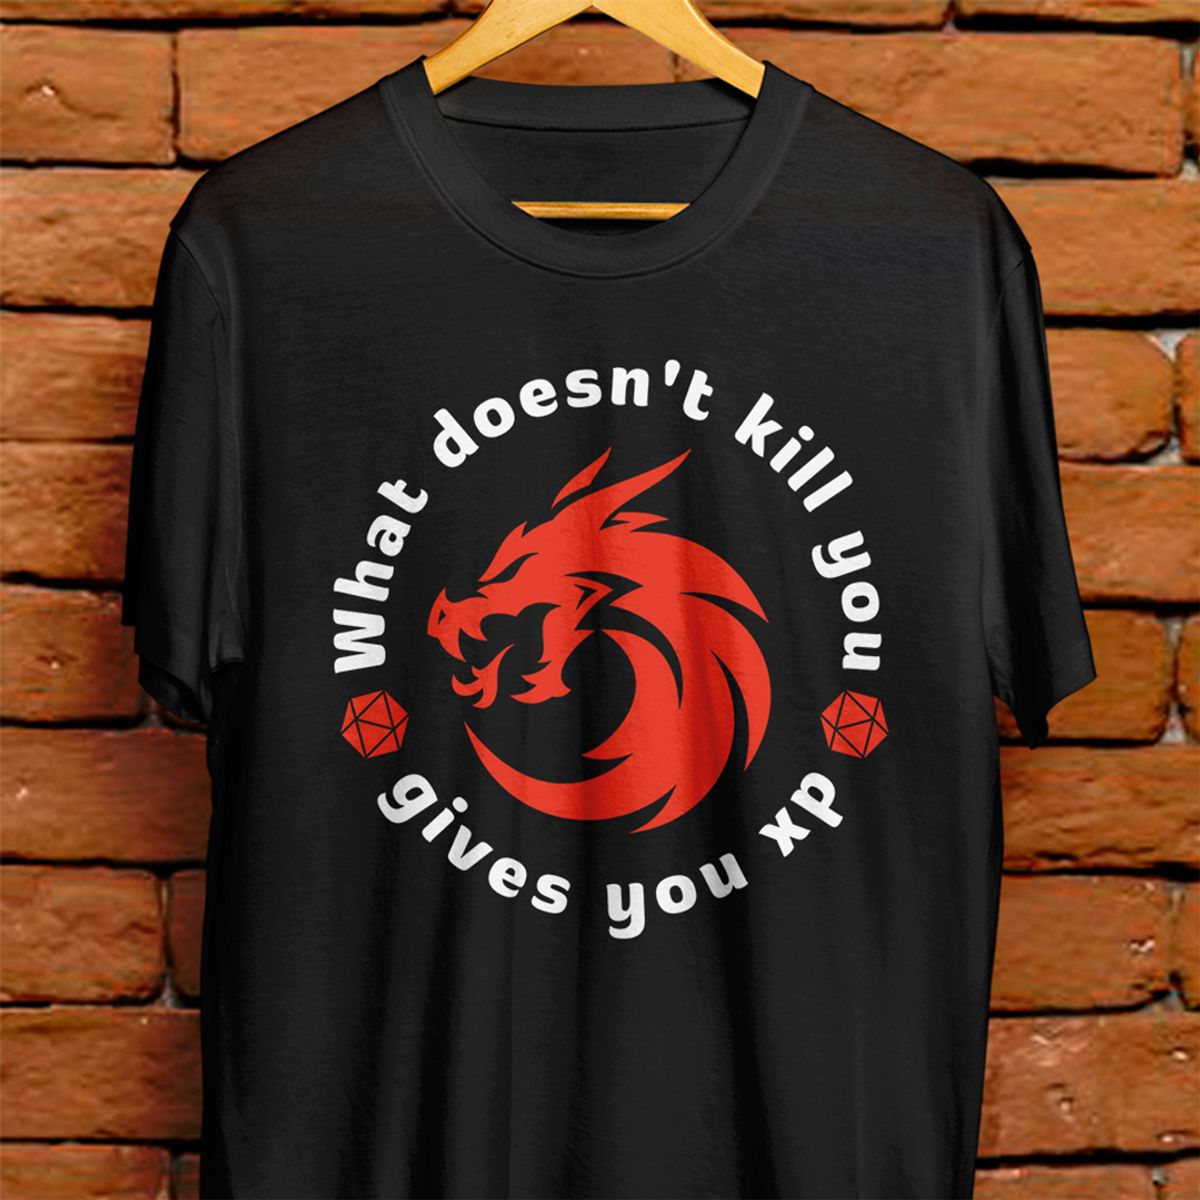 Nome do produto: Camiseta Unissex - What doesn\'t kill you, gives you xp